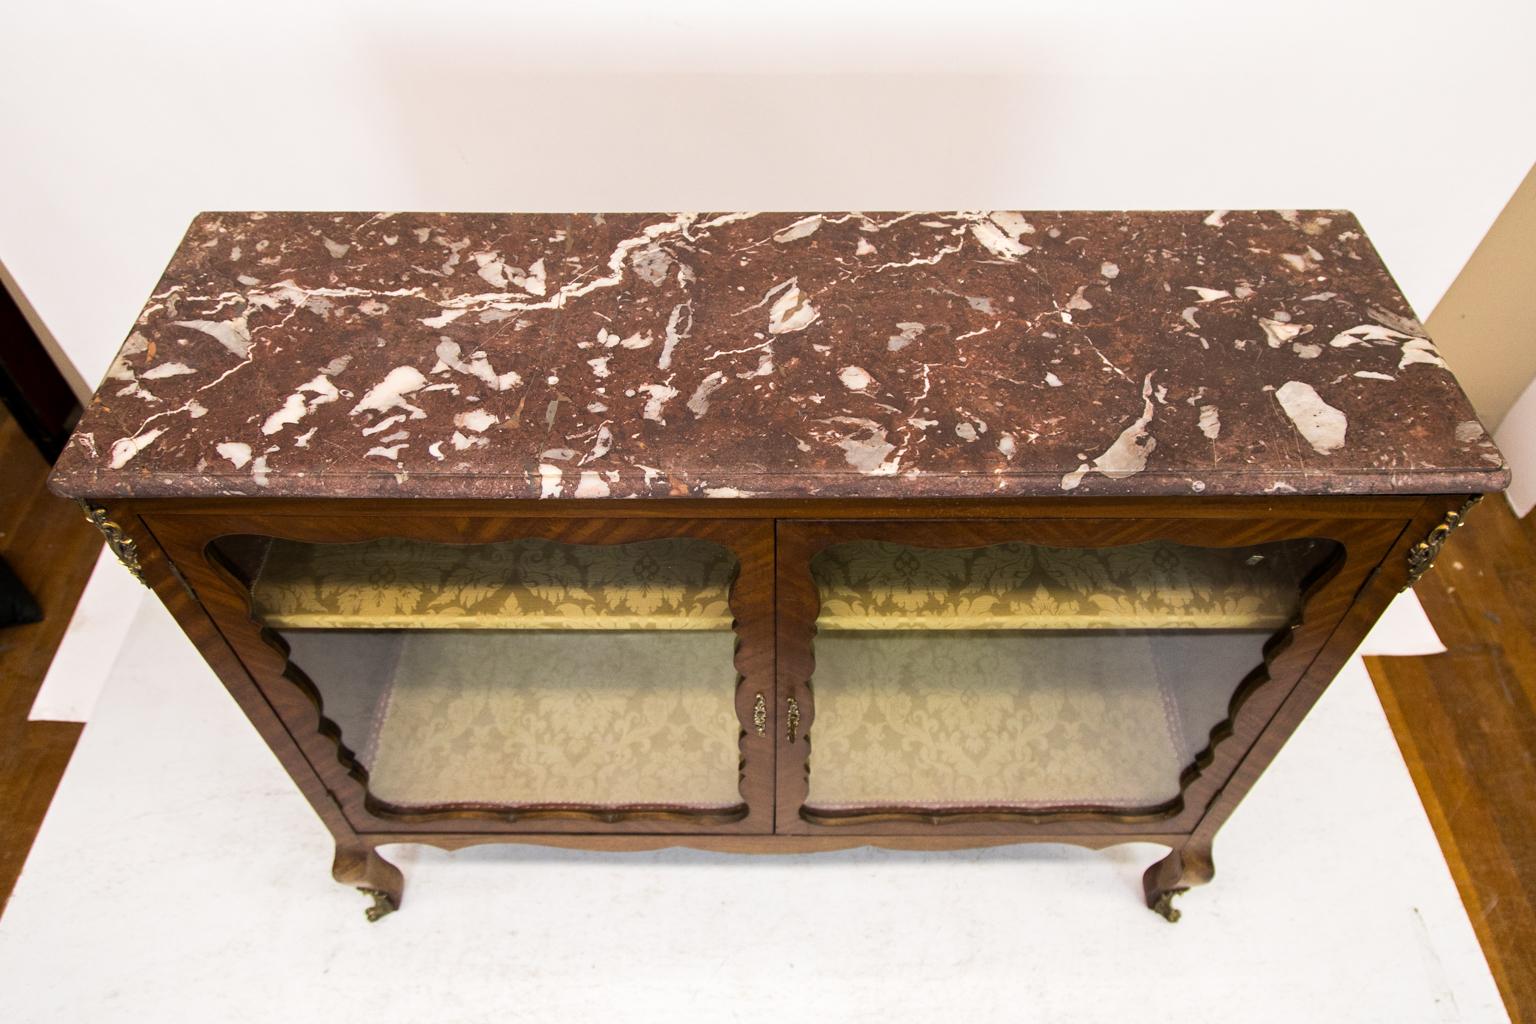 - This French marble-top display/bookcase has doors with a scalloped shape and are crossbanded with bookmatched flame mahogany. The sides have flamed bookmatched mahogany panels. The interior and shelf are covered with a floral green damask